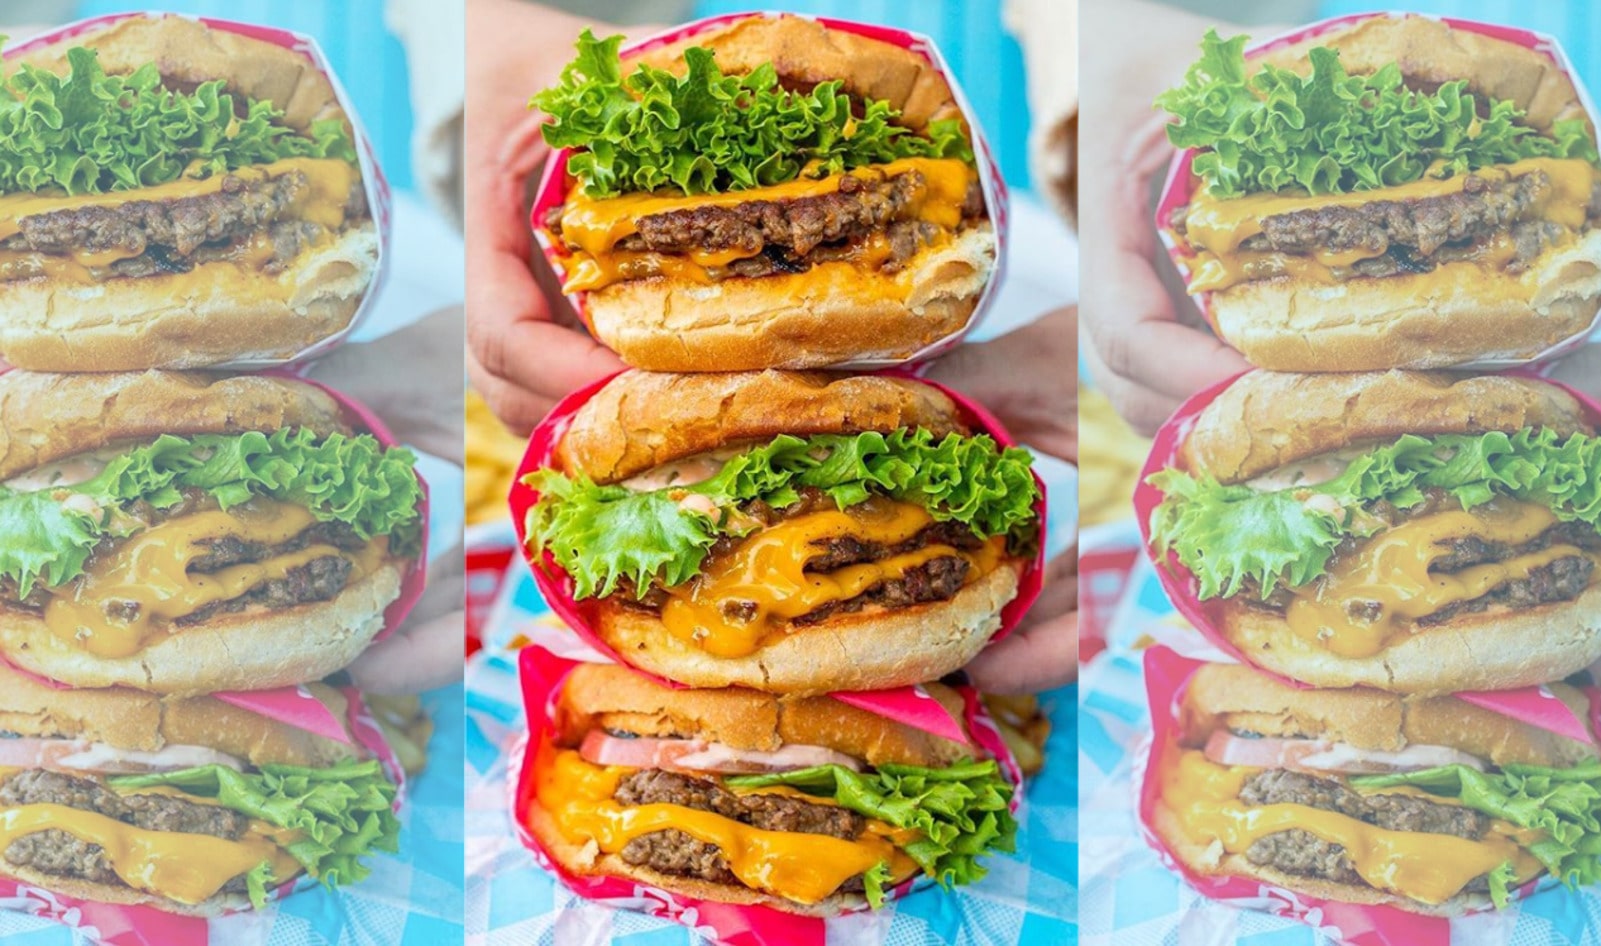 Here's All the Plant-Based Food You Can Find at Coachella This Year